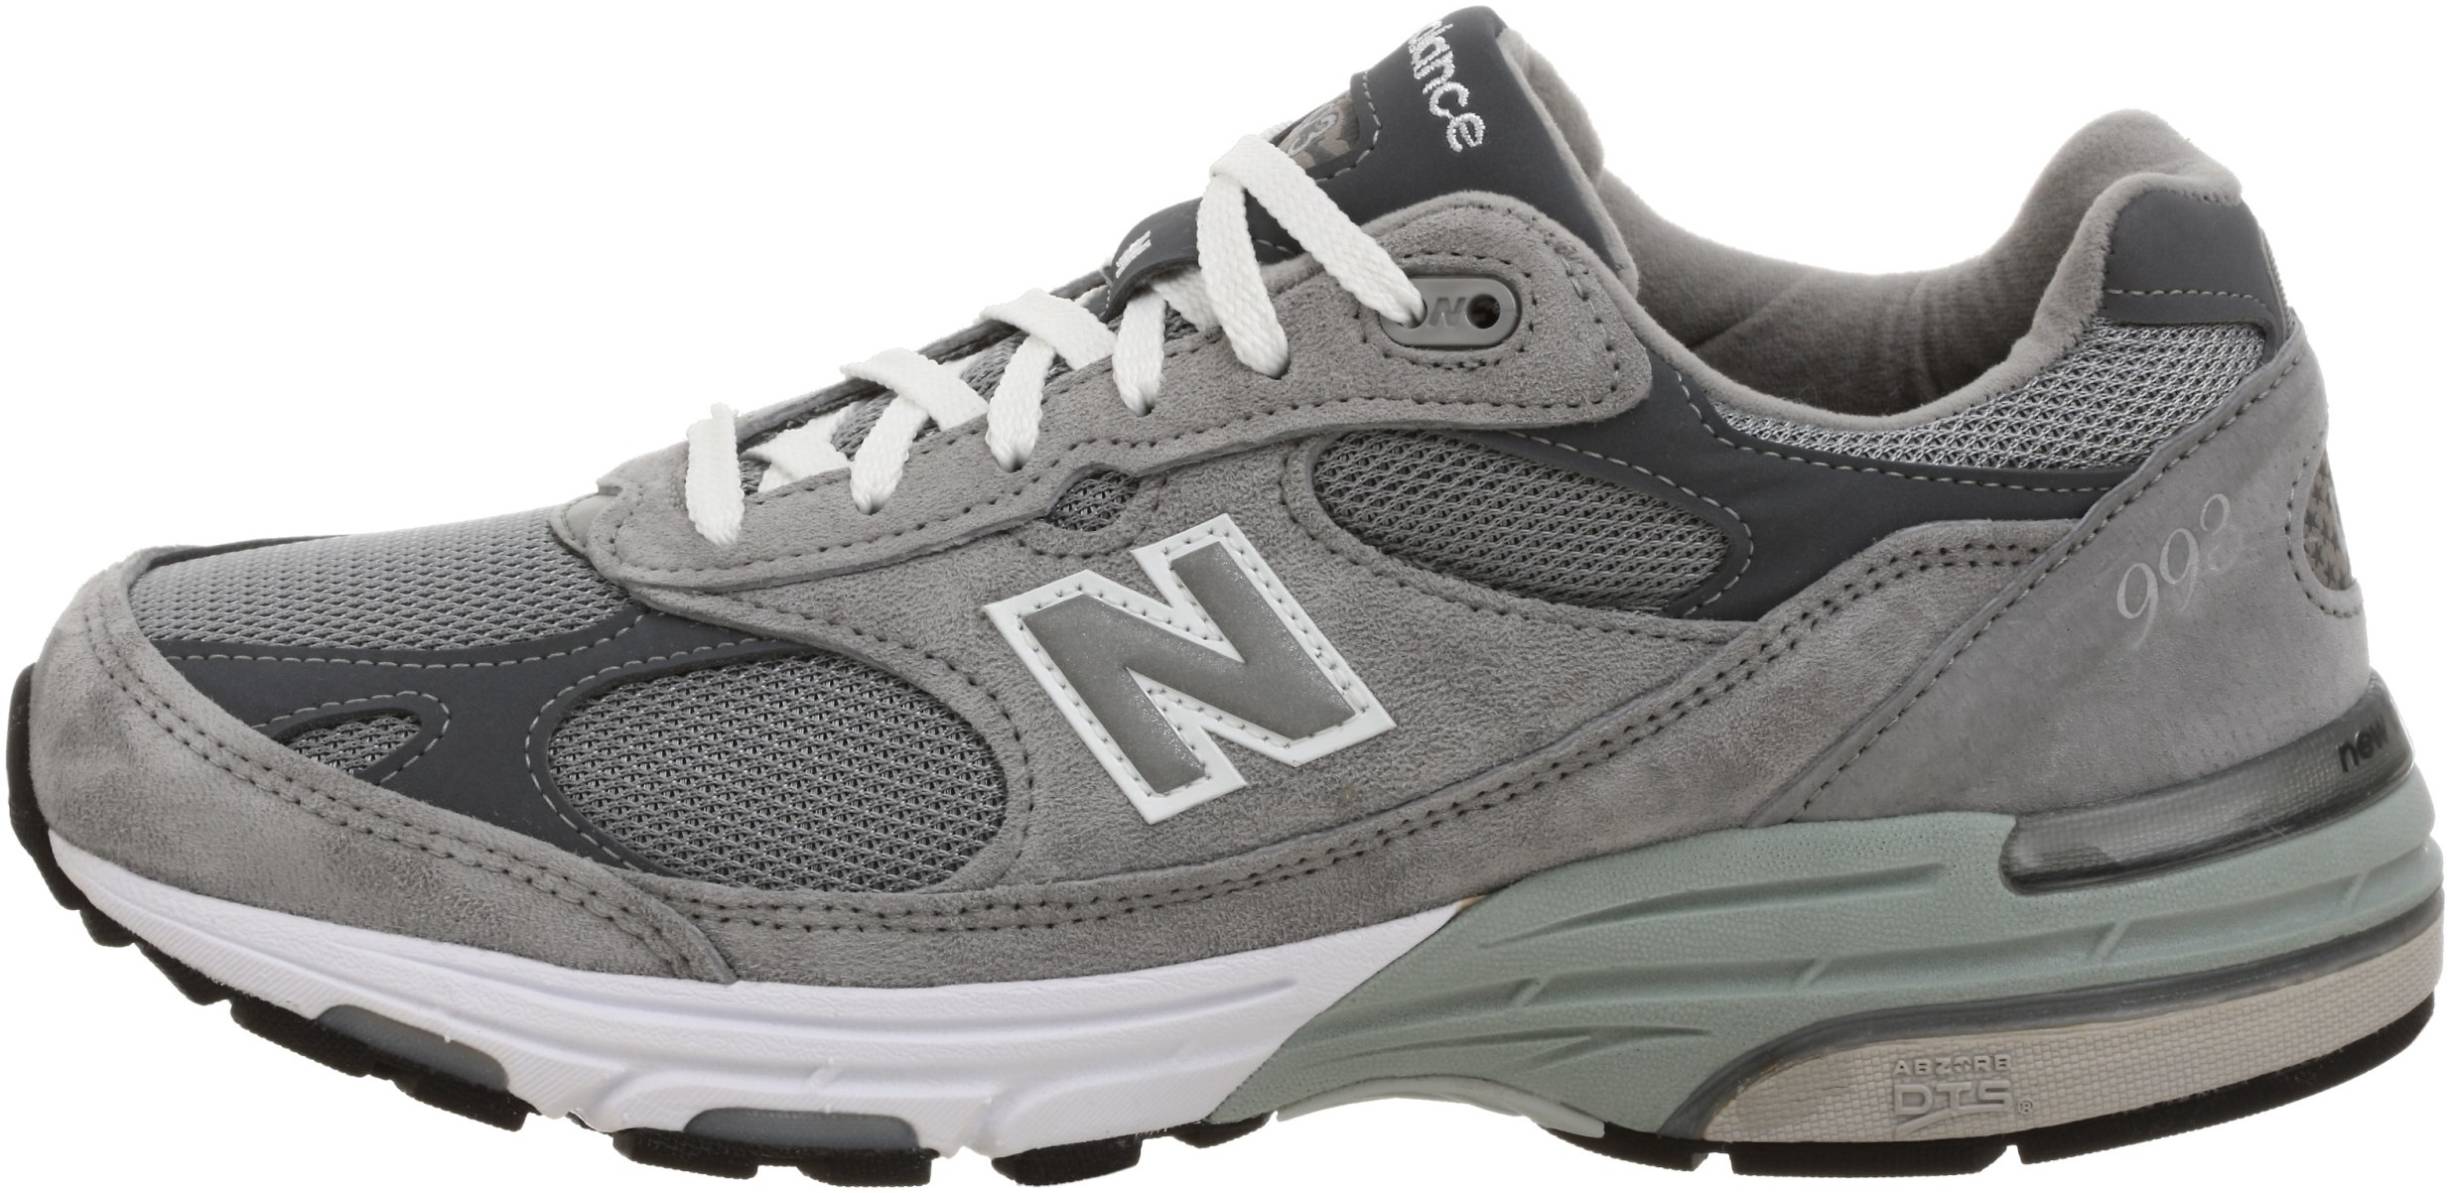 Grey New Balance Leather 993 Sneakers in Grey Womens Shoes 